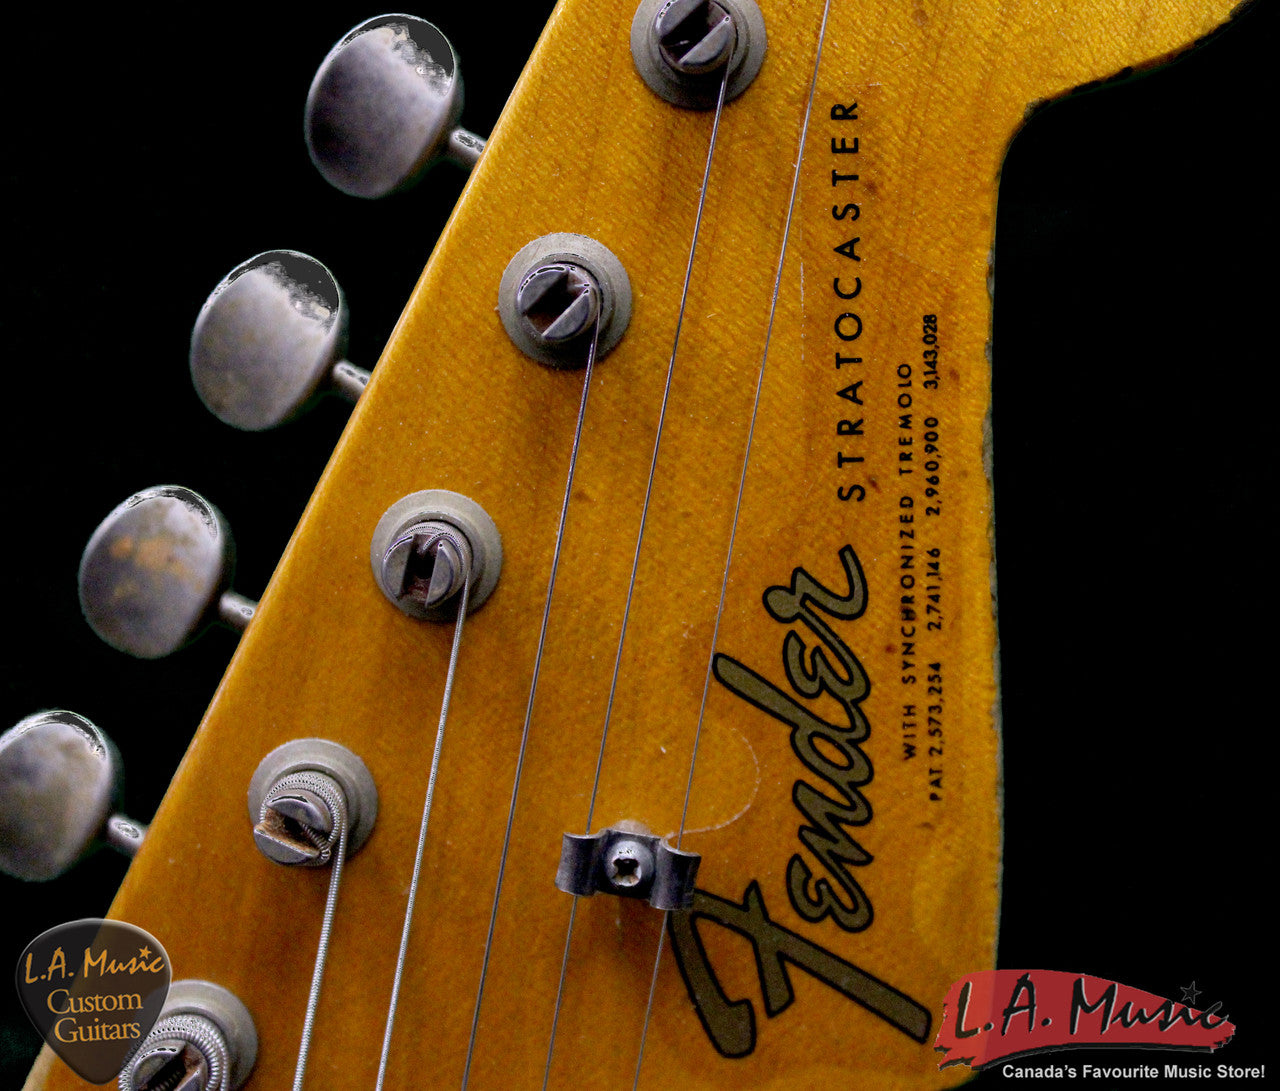 Fender Custom Shop L-Series 1964 Stratocaster Super Heavy Relic Fiesta Red Rosewood 9231990840 - Serial Number - L10634 - L.A. Music - Canada's Favourite Music Store!